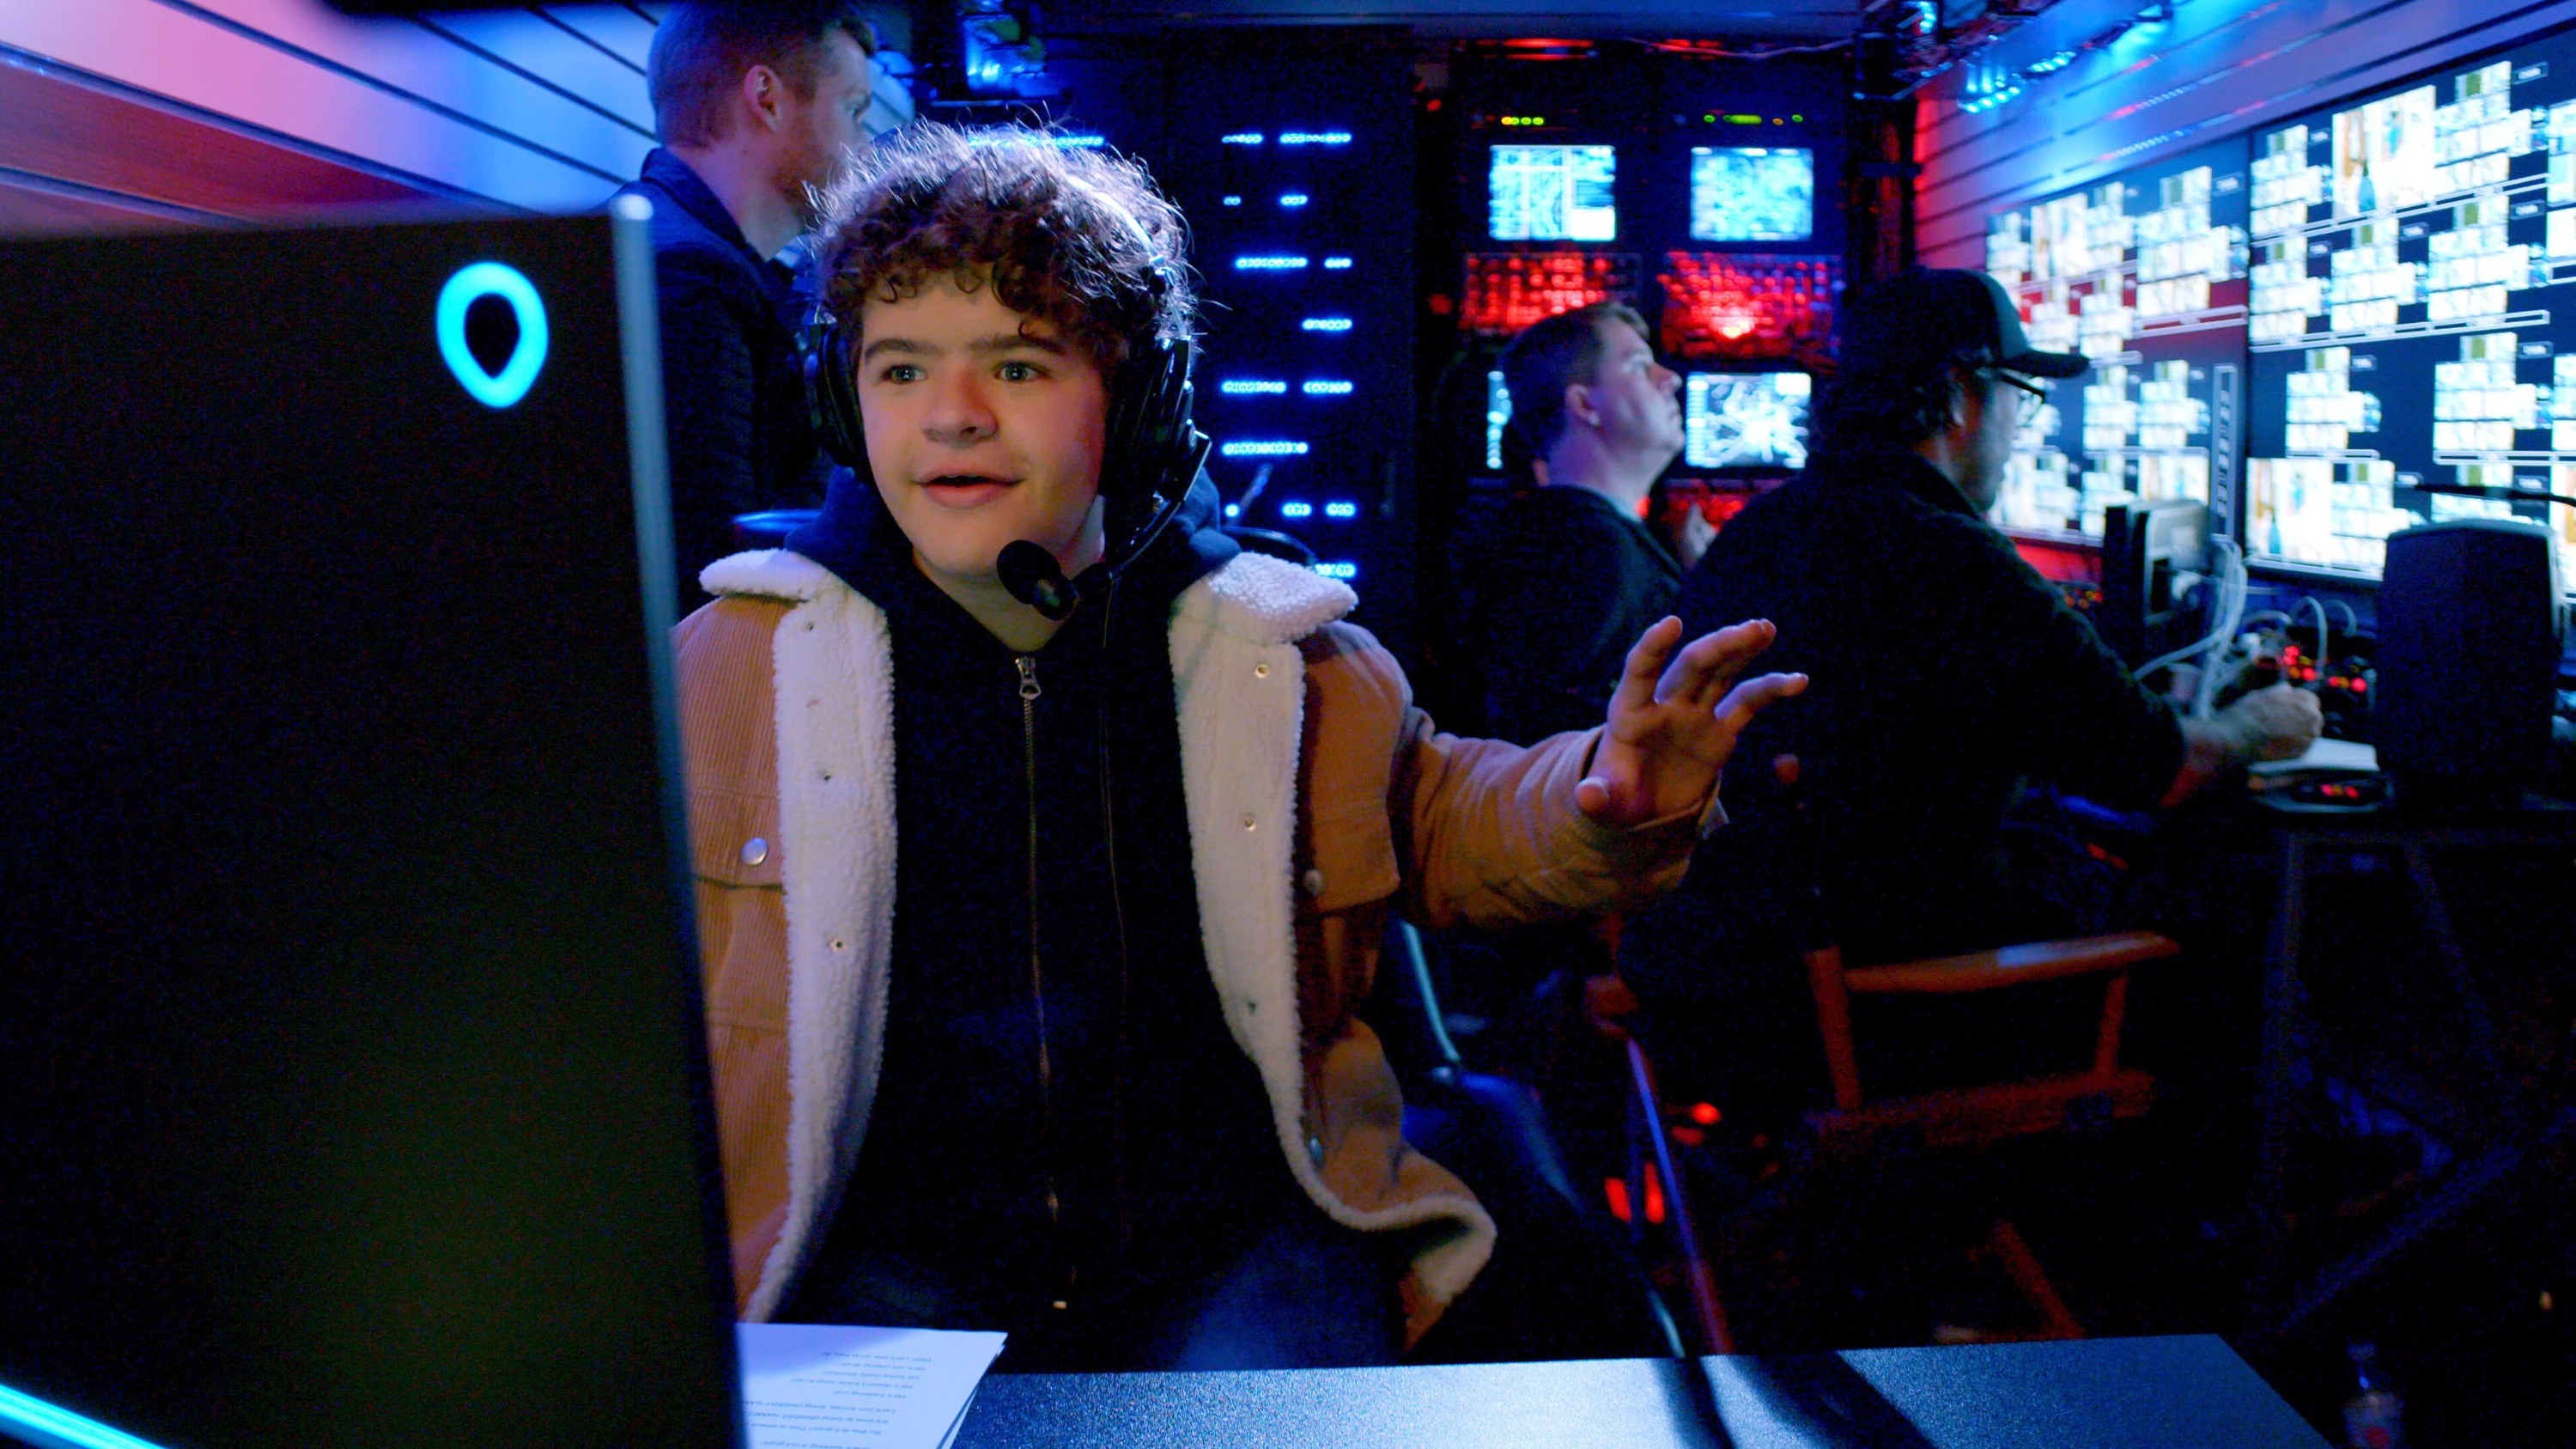 Gaten at a computer in a scene from Prank Encounters